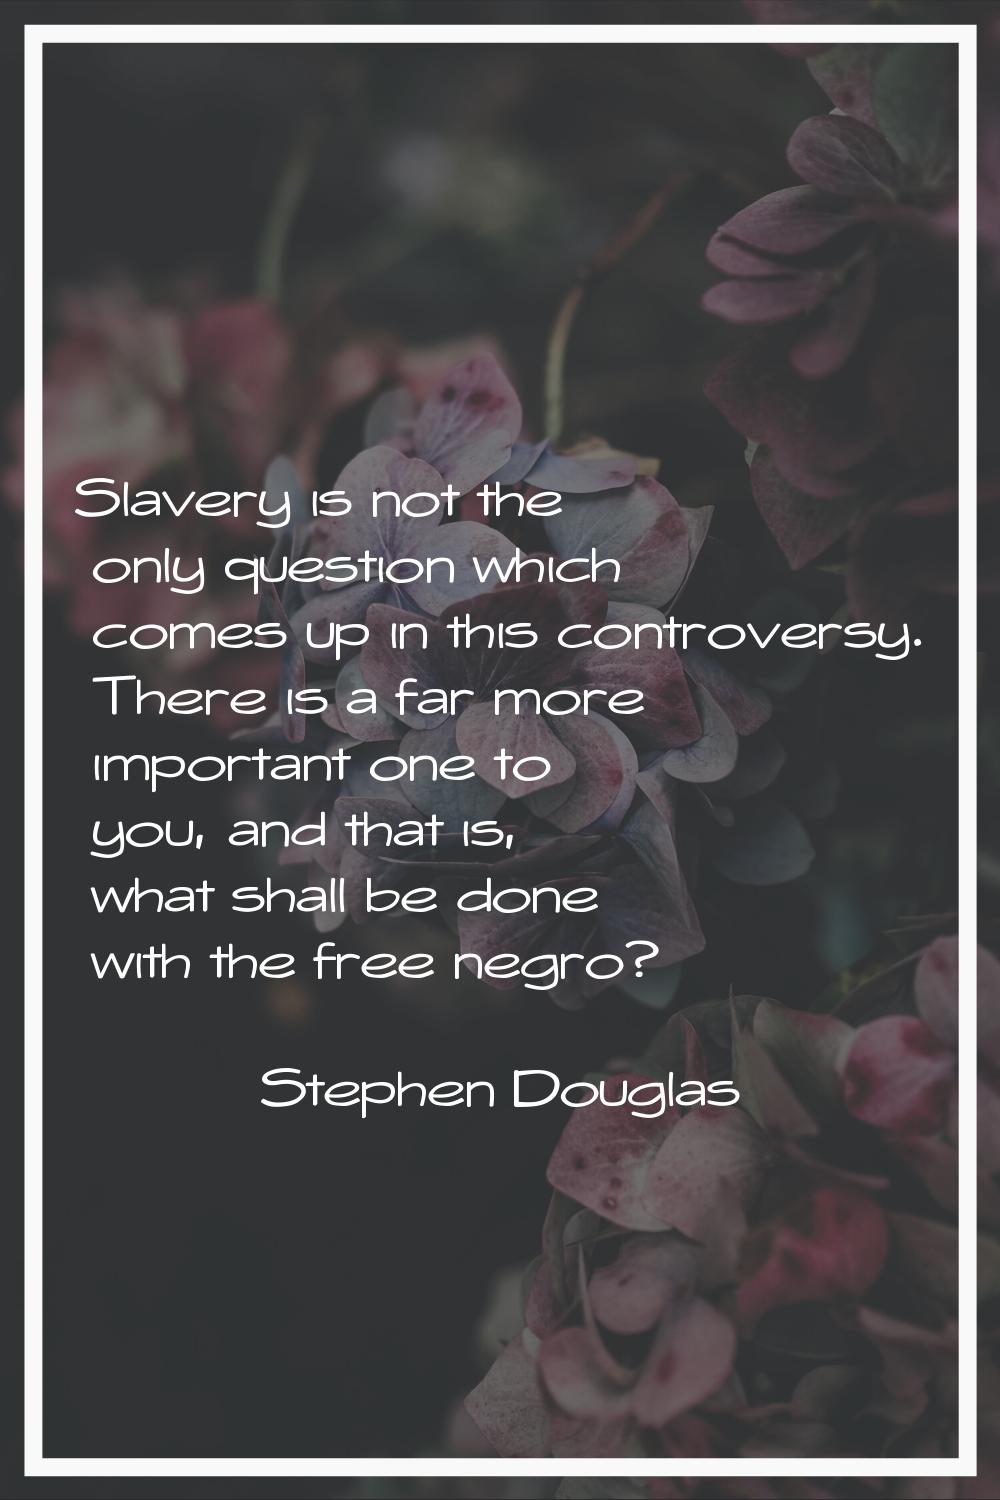 Slavery is not the only question which comes up in this controversy. There is a far more important 